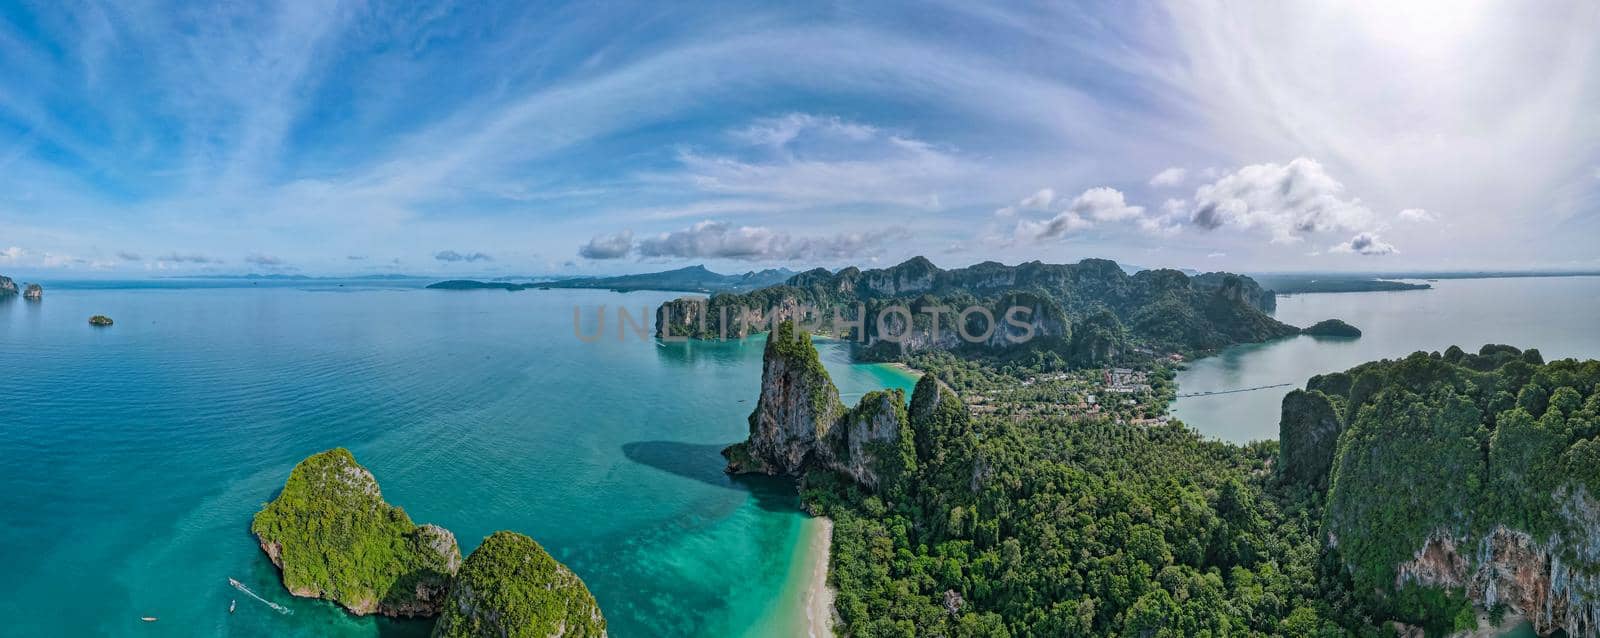 Railay Beach Krabi Thailand, the tropical beach of Railay Krabi, Drone aerial view of Panoramic view of idyllic Railay Beach in Thailand with a huge limestone rocks from above with drone